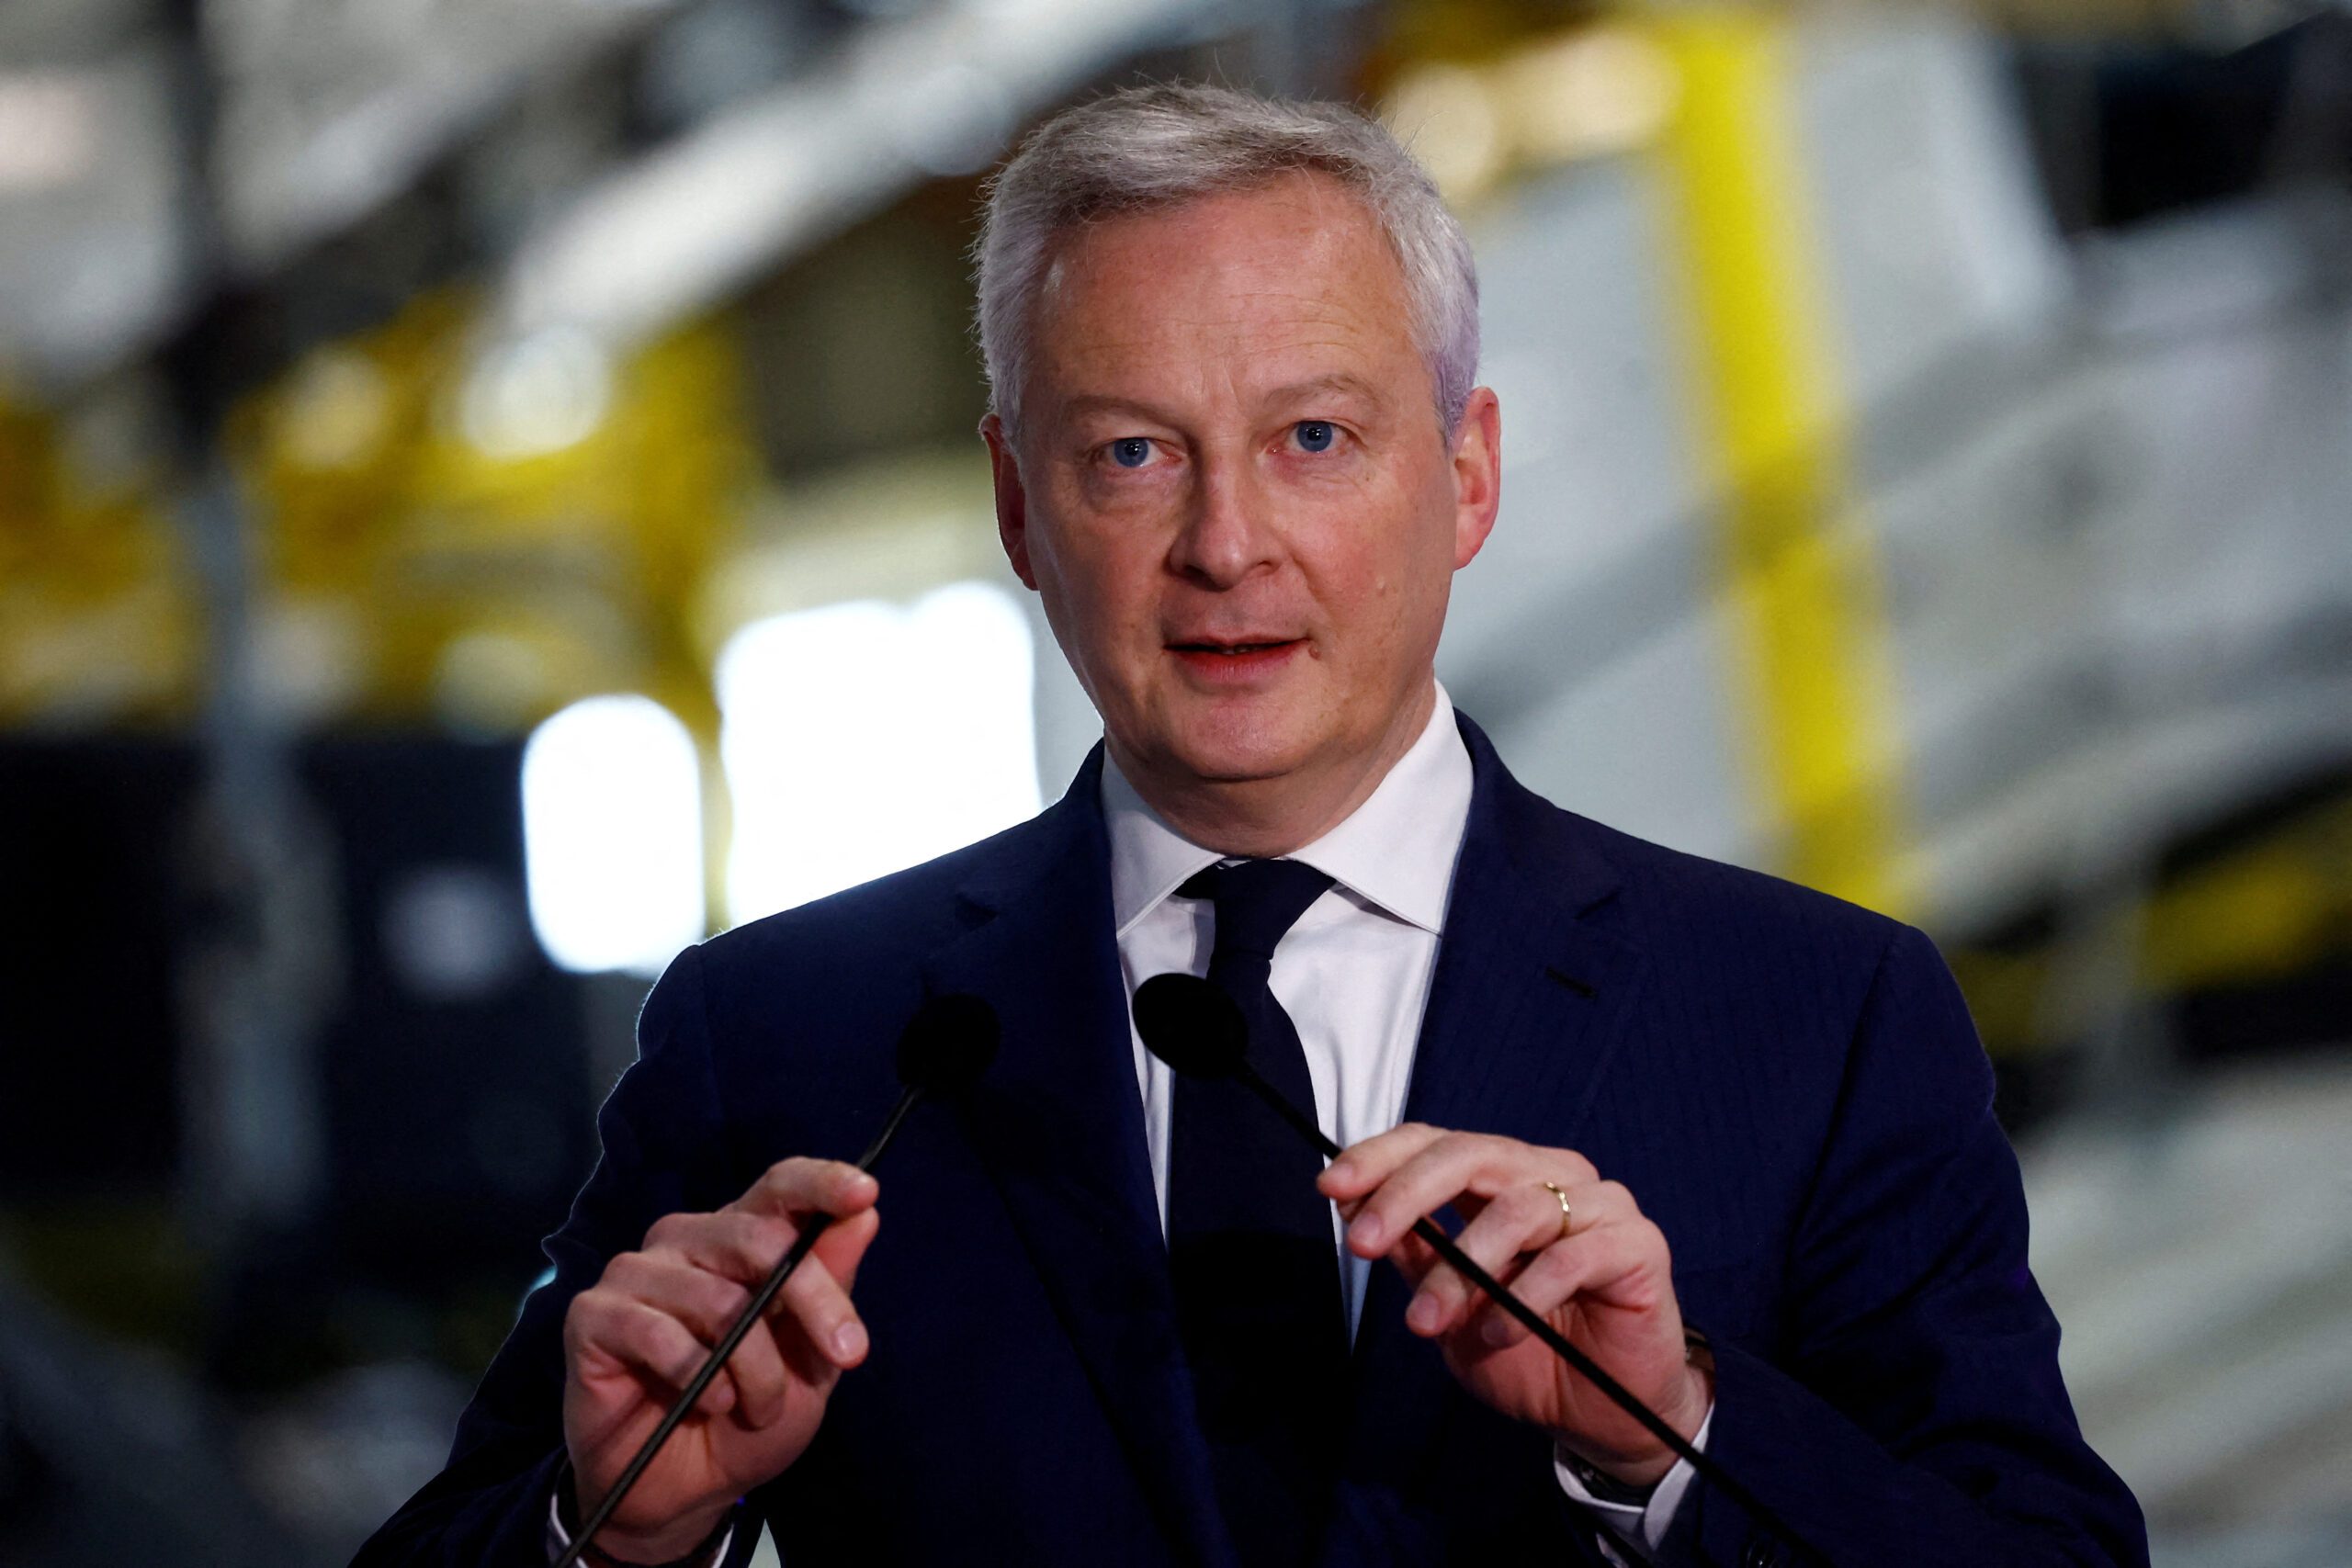 Bruno Le Maire said France was also ready to help the UAE develop its own nuclear power plants